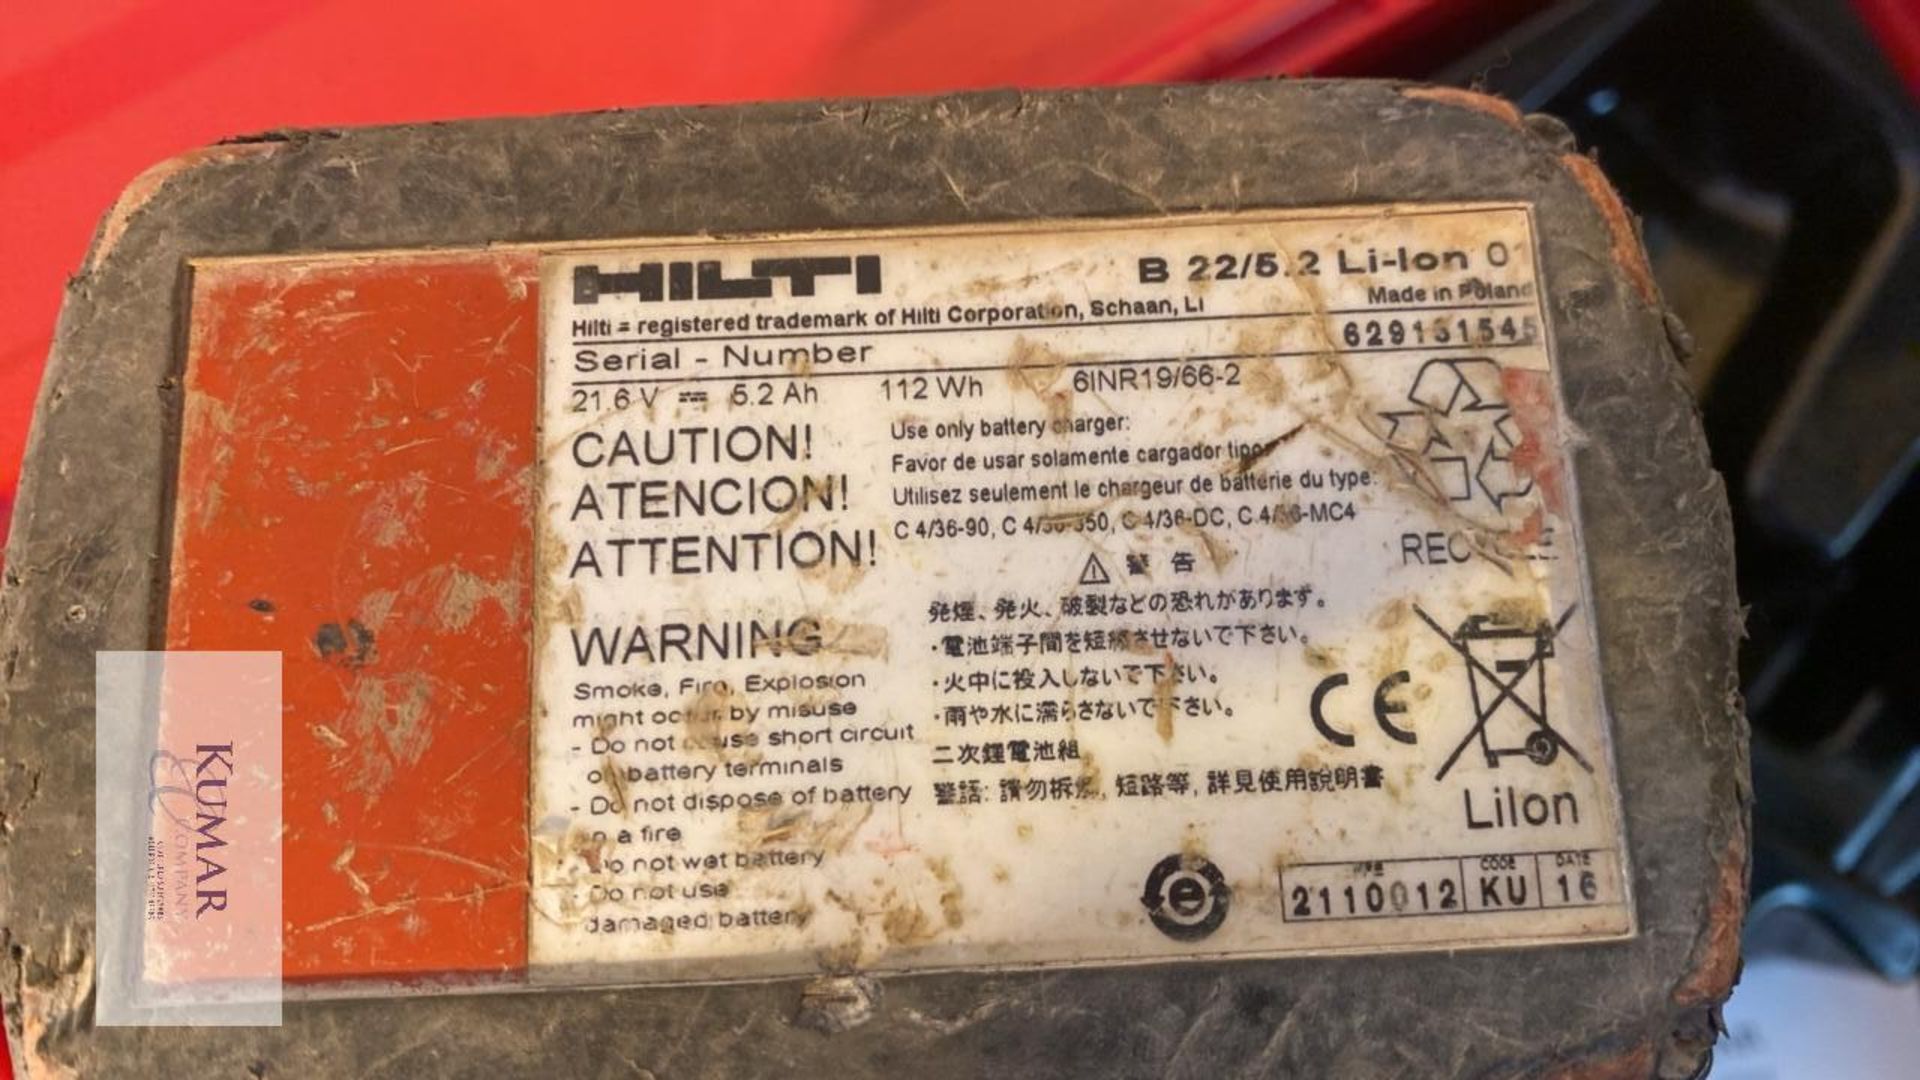 Hilti SIW-22T-A 1/2" Impact Driver with battery and case, Serial No.629131545 (2016) No Charger - Image 3 of 4